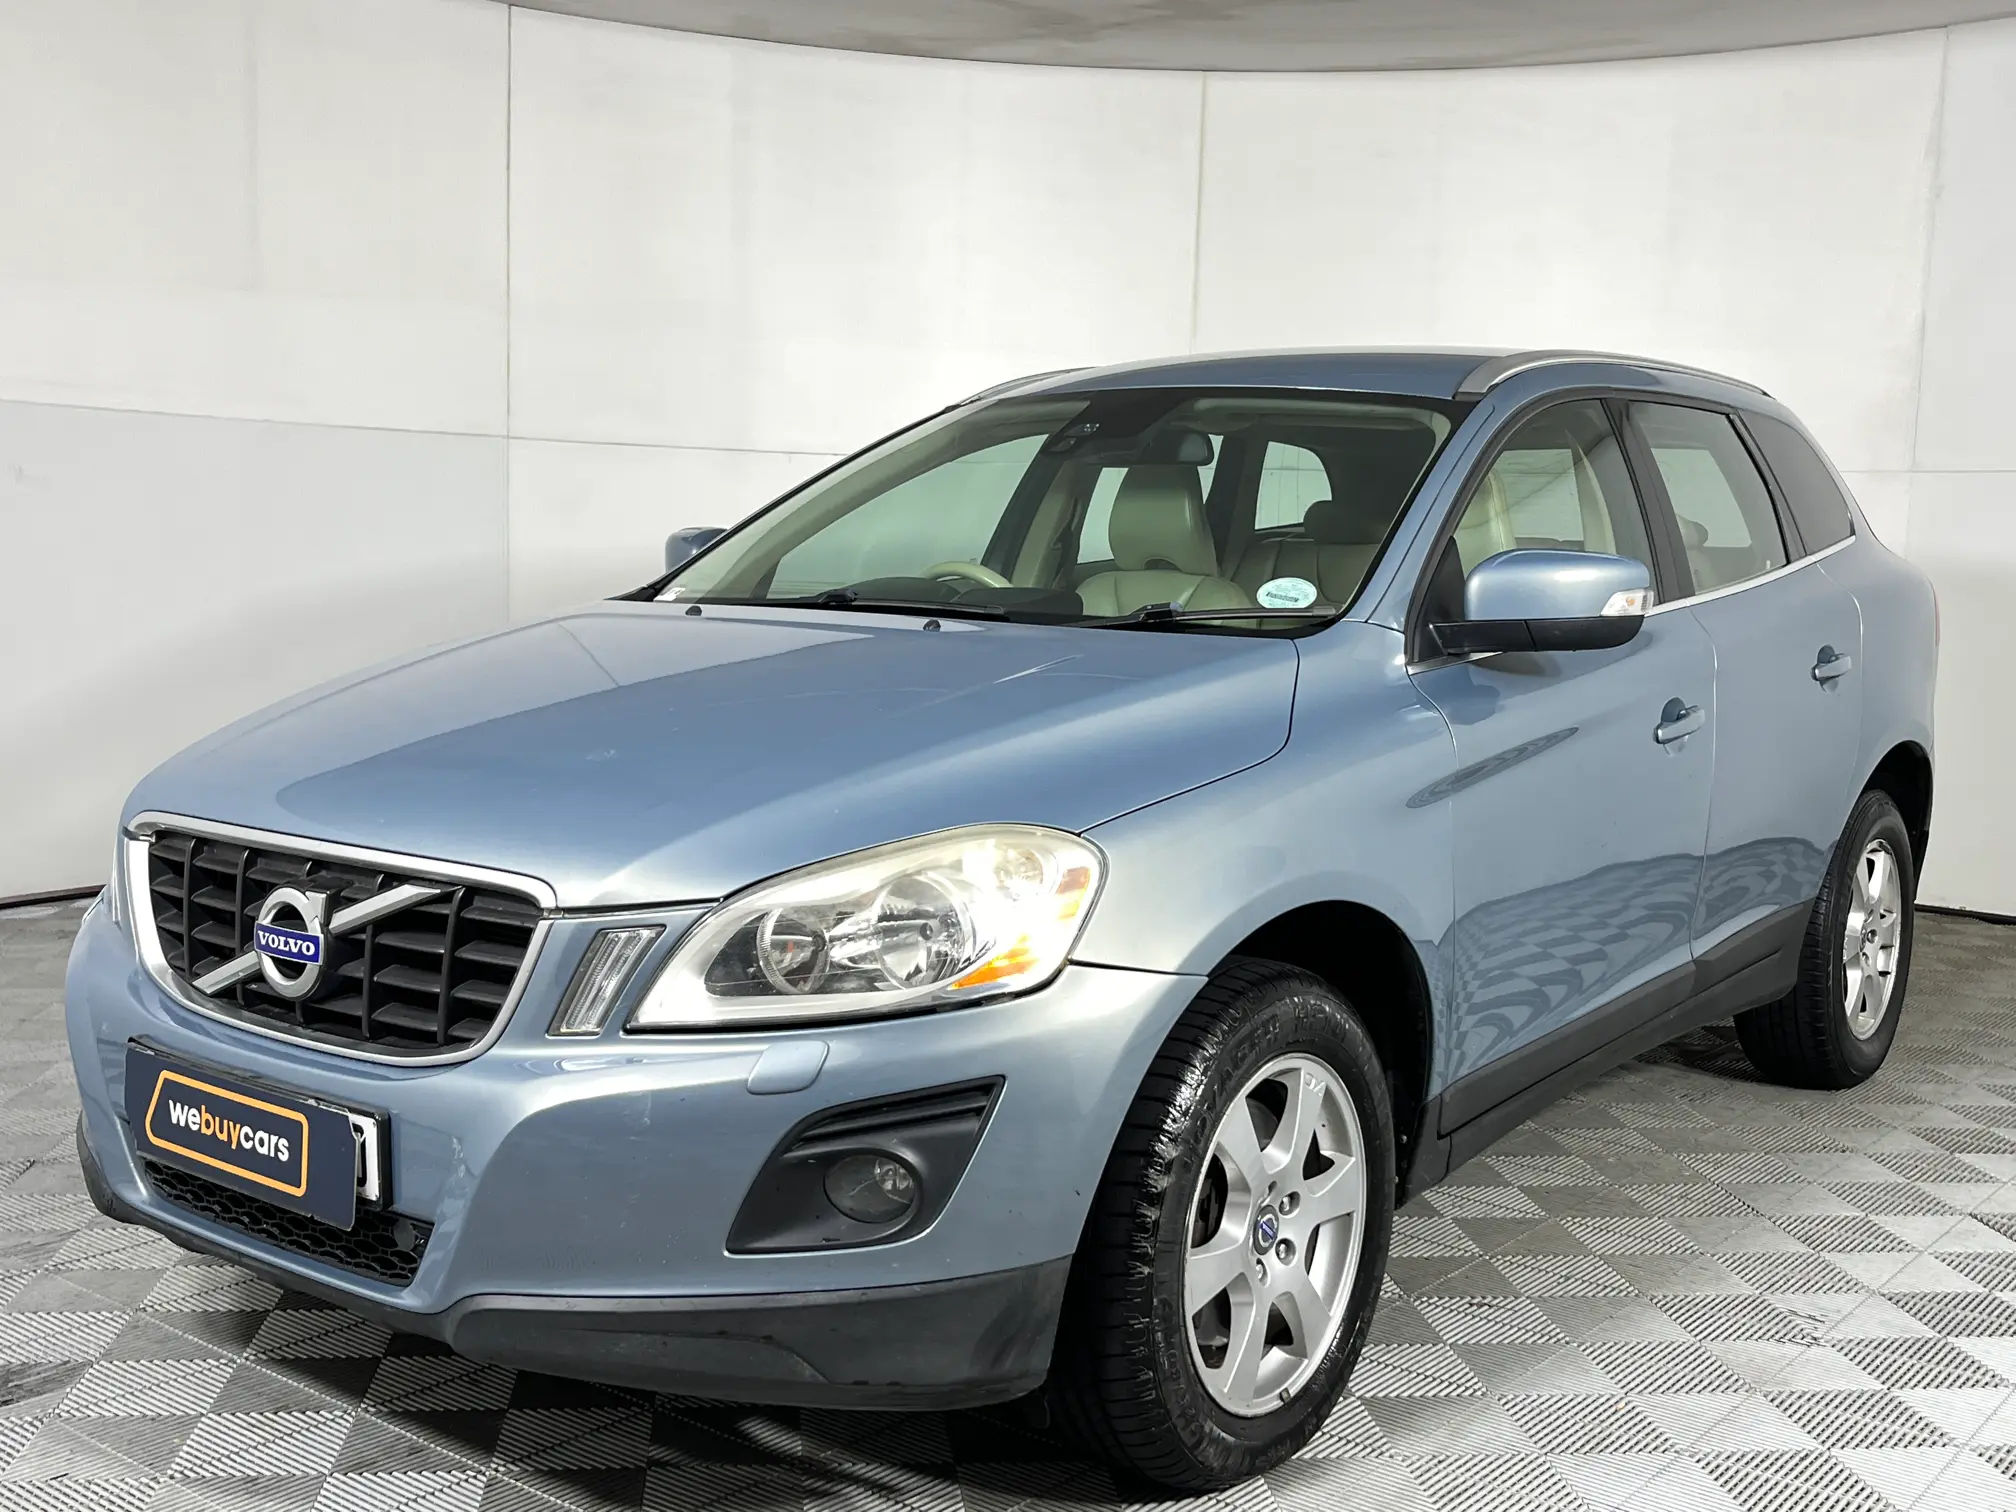 2009 Volvo Xc60 D5 Geartronic